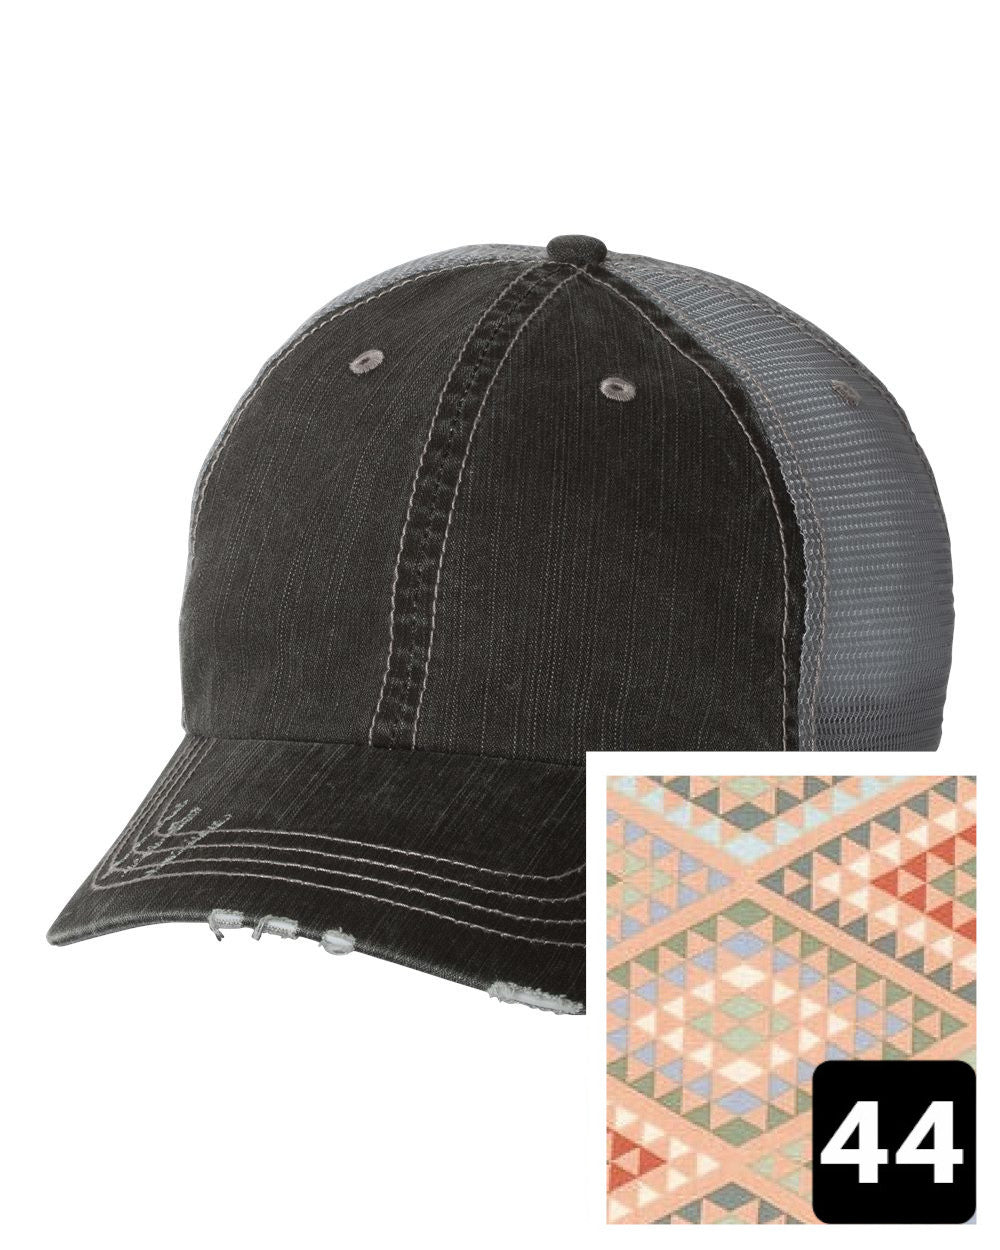 gray distressed trucker hat with navy coral and white chevron fabric state of North Dakota